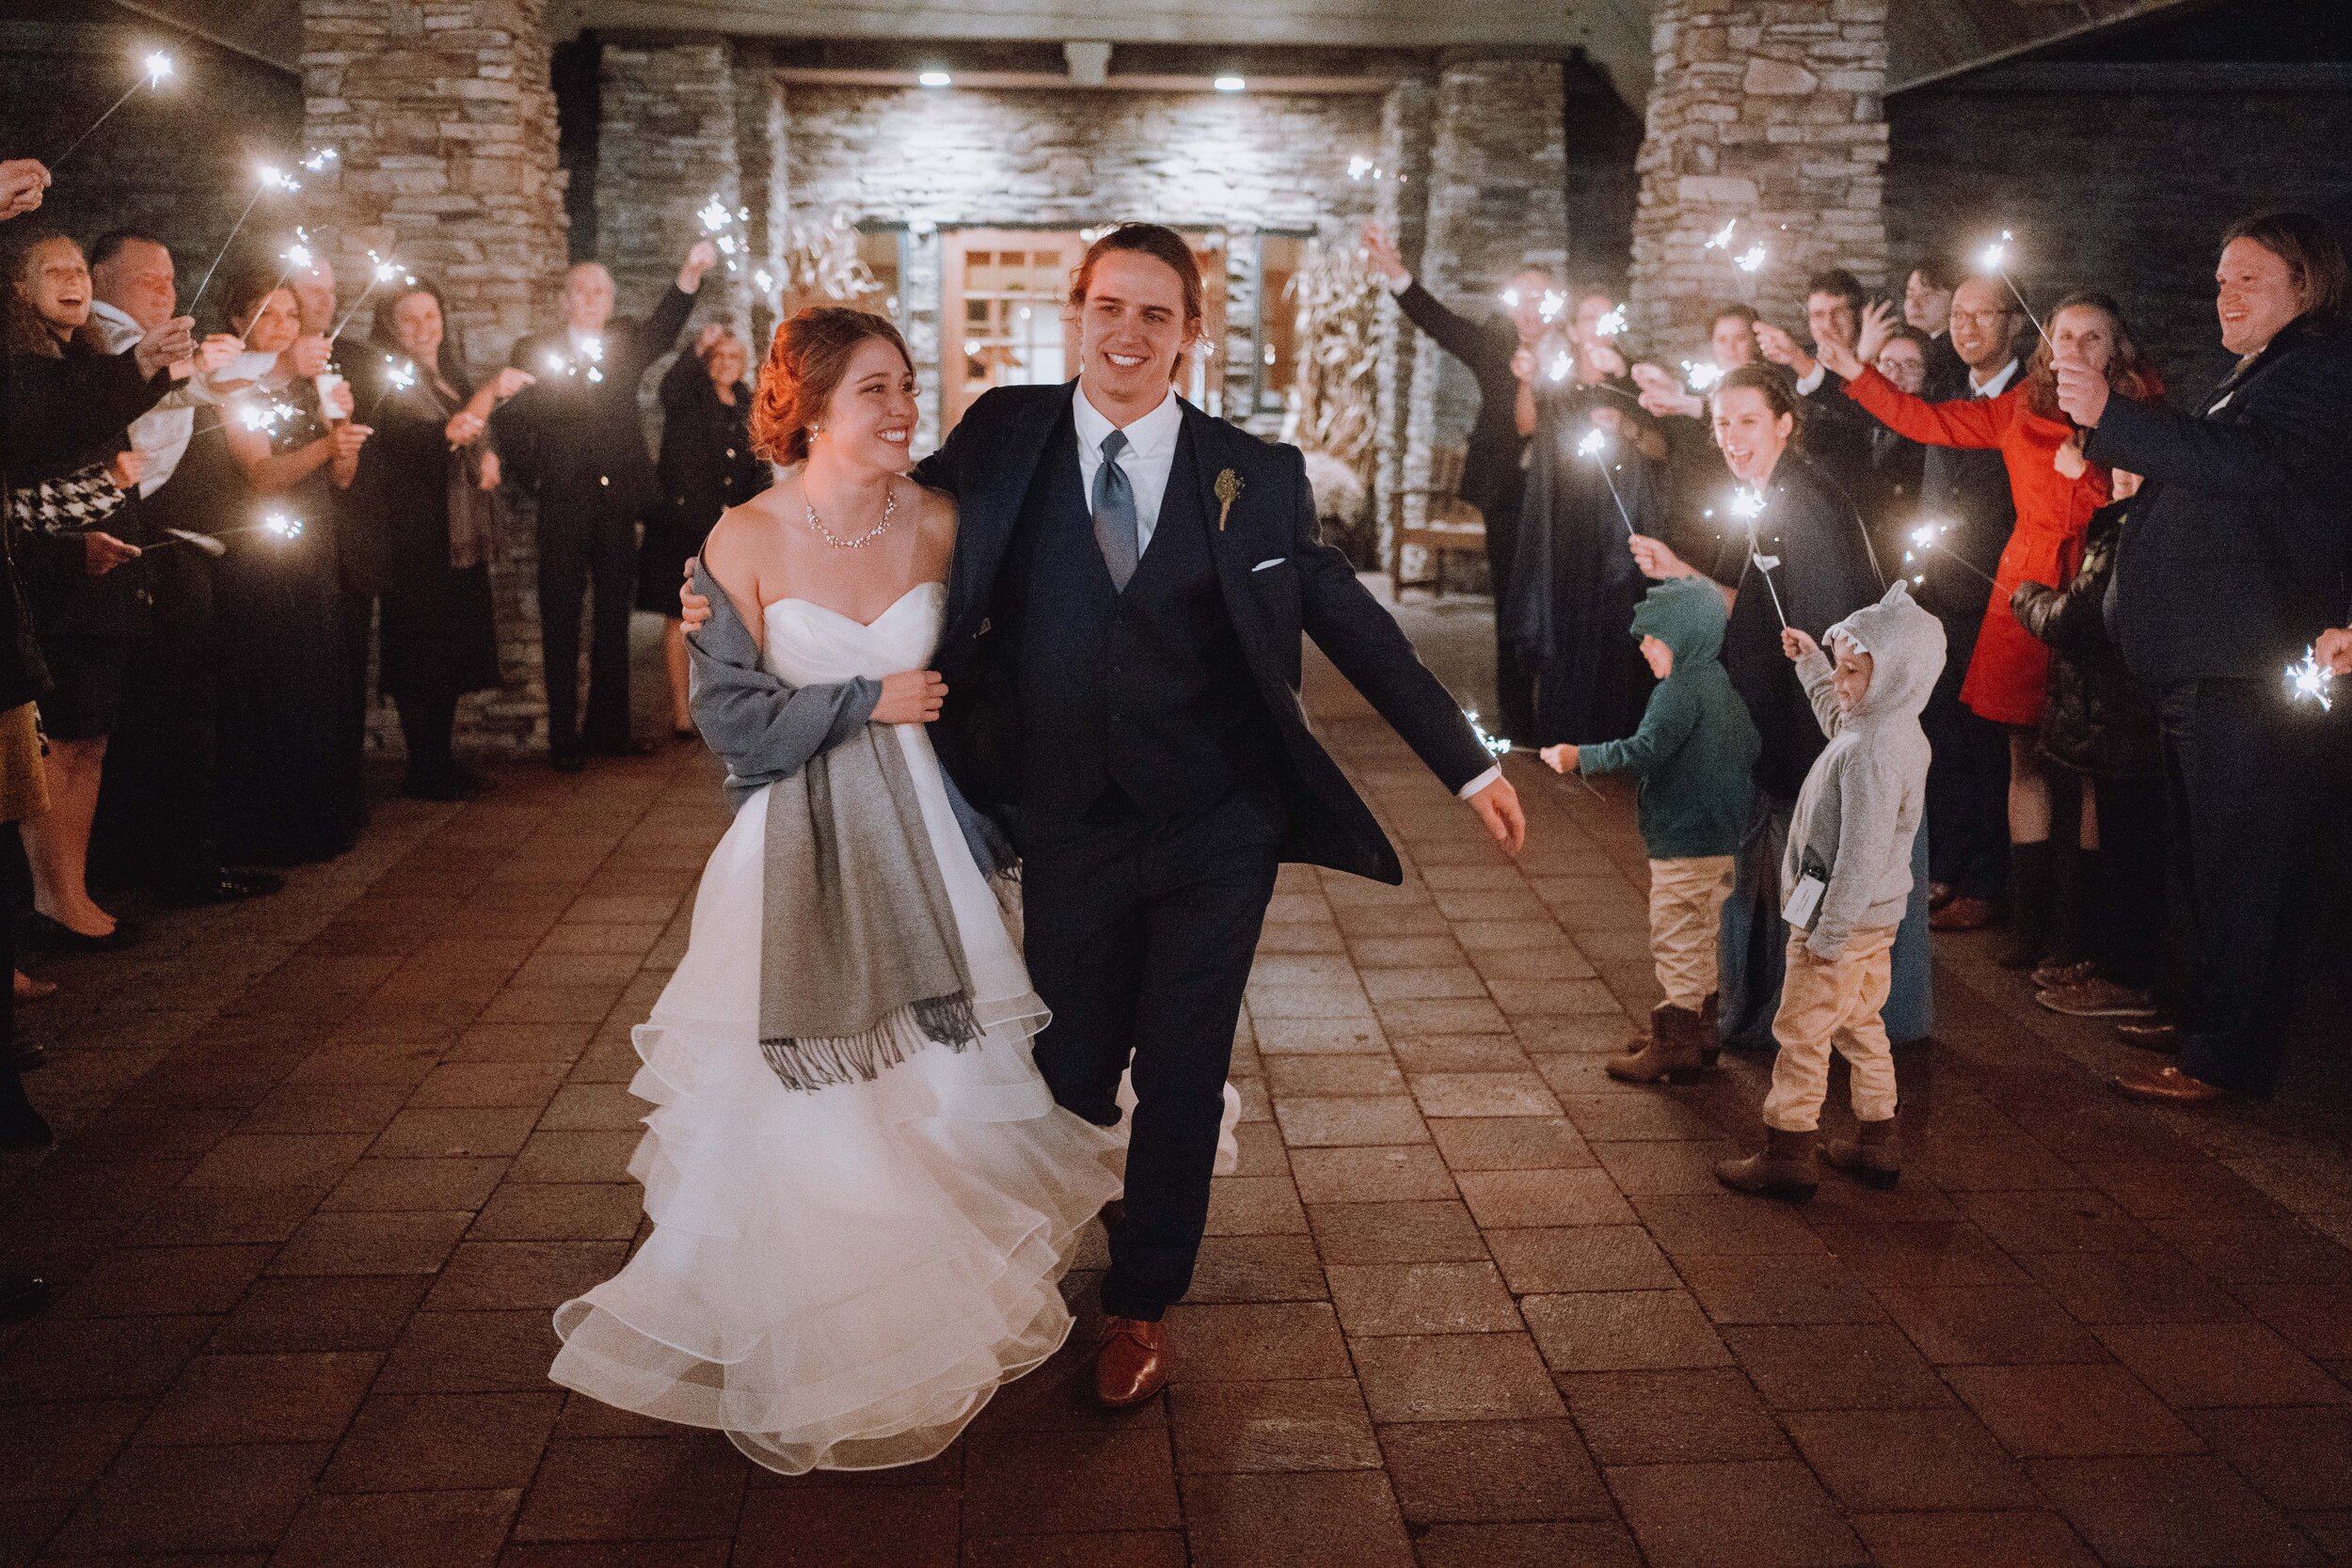 Wedding Hannah and Aaron at Timberlodge in Buffalo NY by Stefan Ludwig Photography-761.jpg